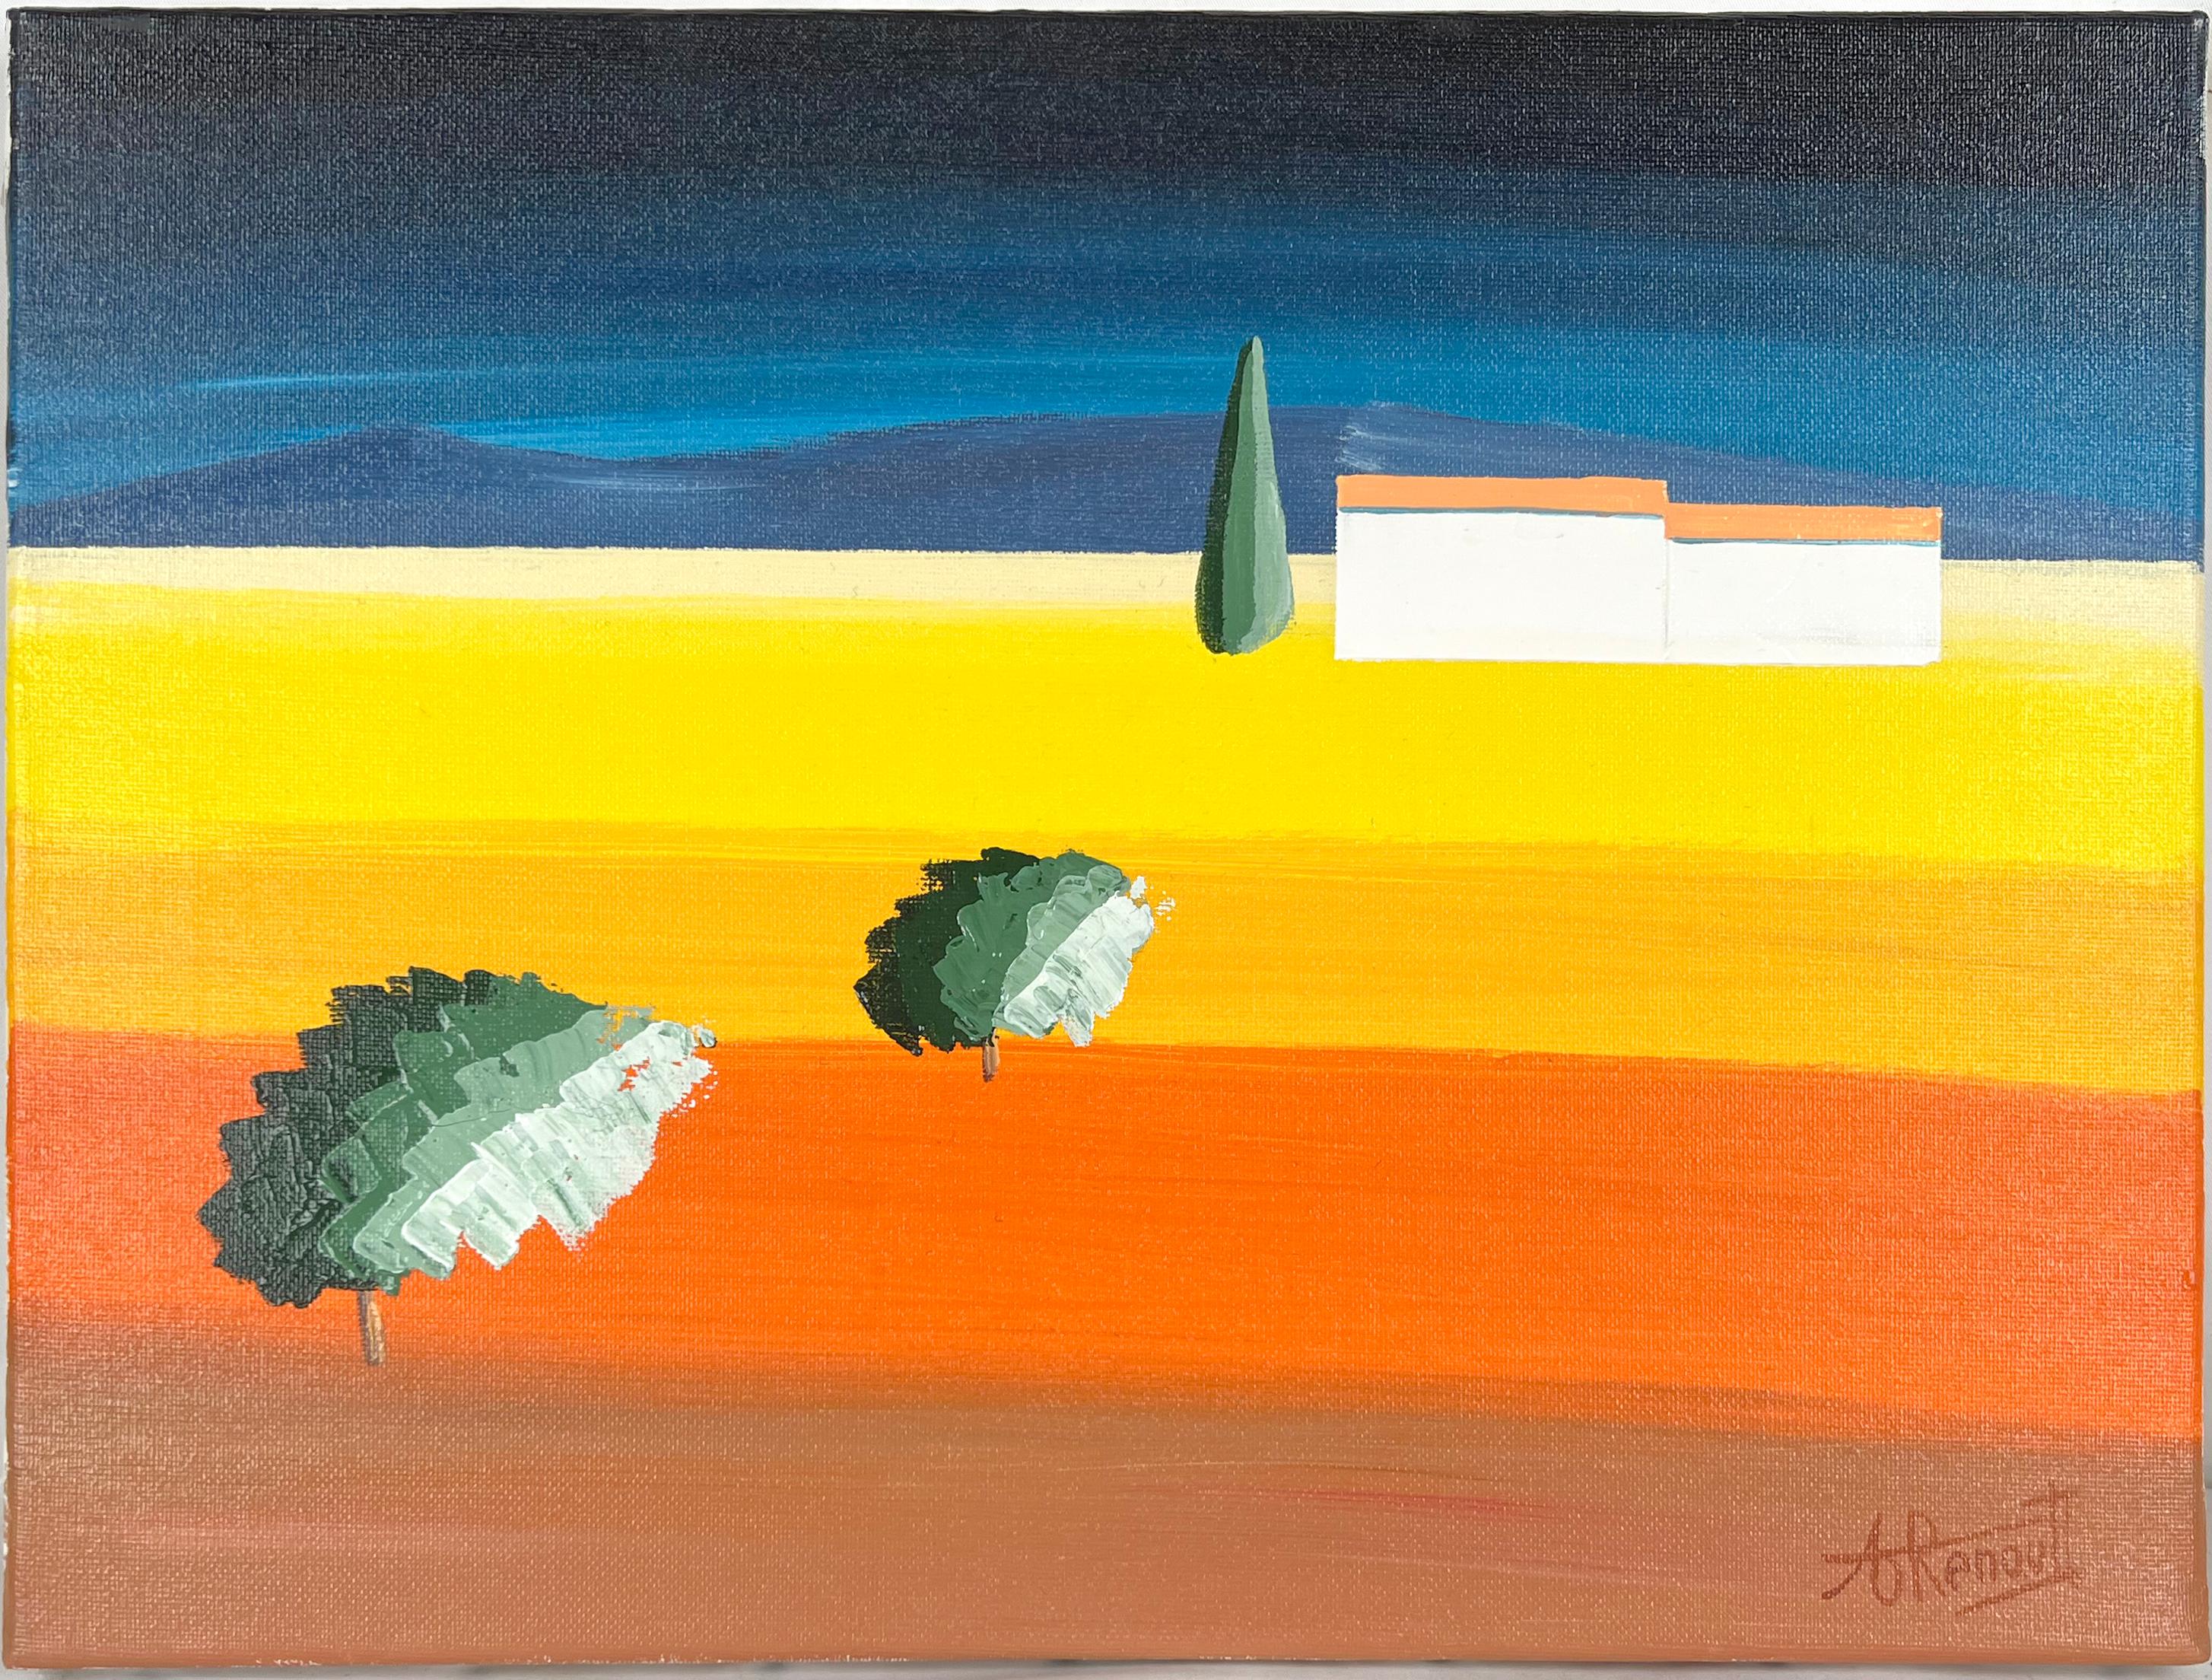 Antoine Renault Landscape Painting - Le Cyprès Abstract Geometric Landscape with Cypress Tree - Acrylic 2004